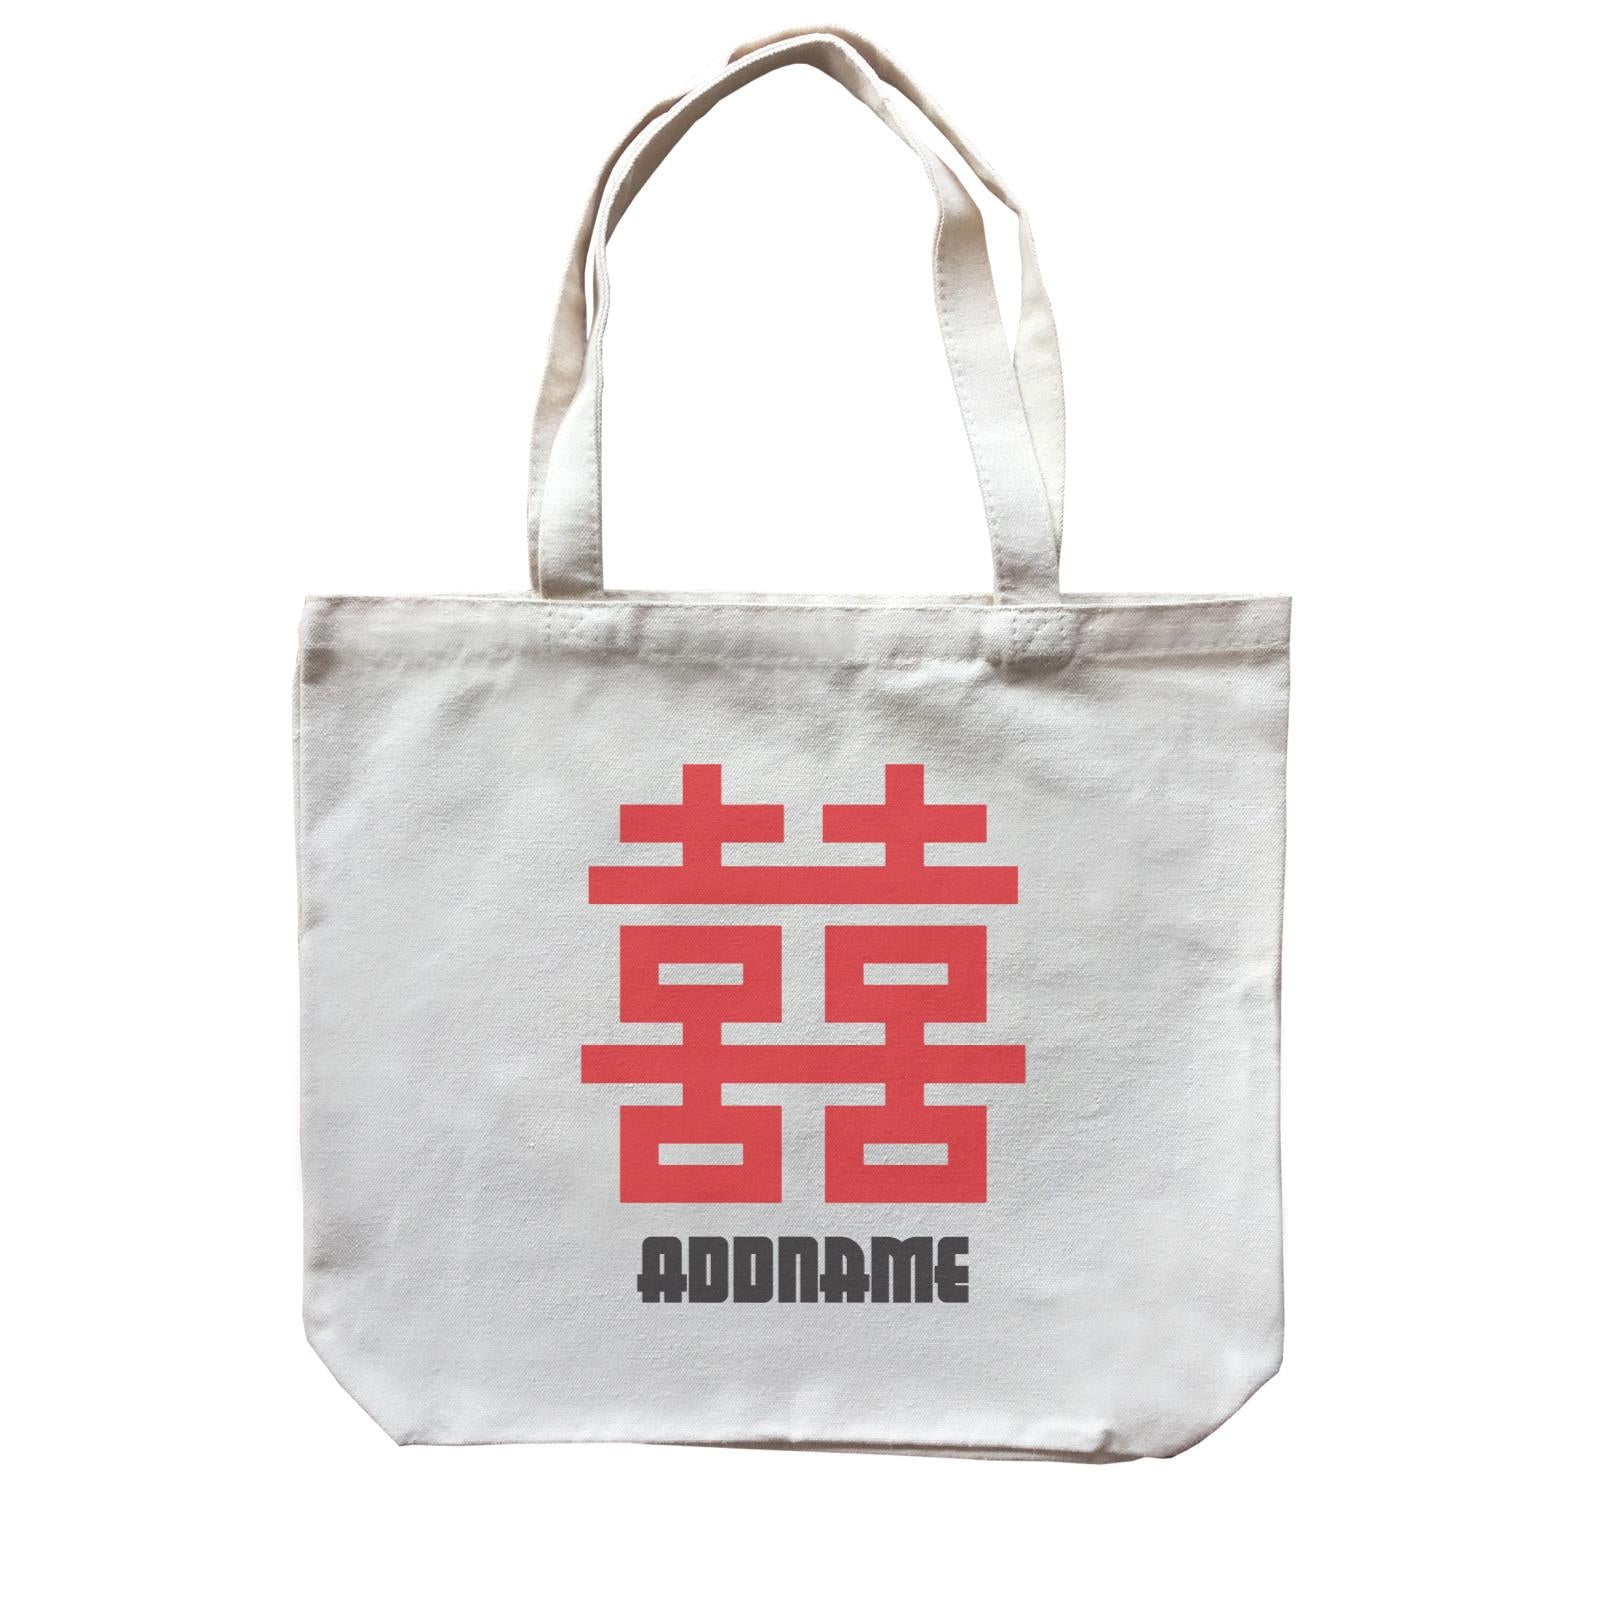 Double Happiness Wedding Words Addname Canvas Bag